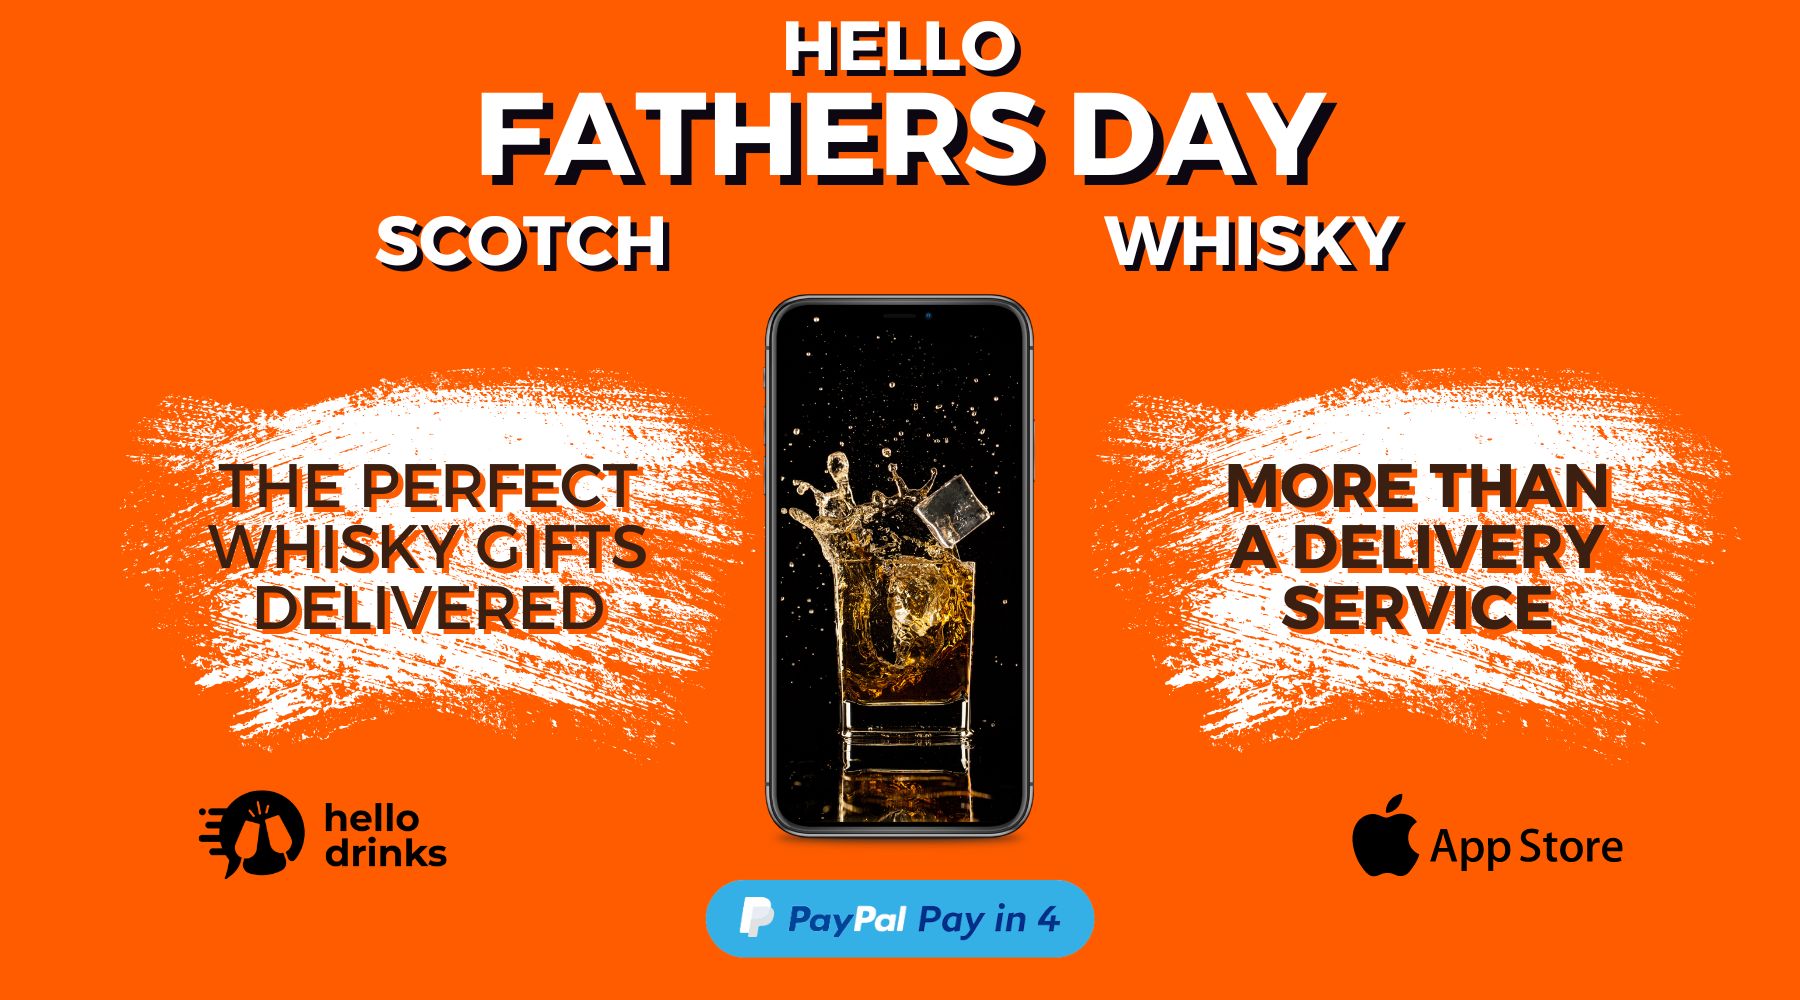 fathers day gifts to buy: 7 popular scotch whiskies for the superhero dad